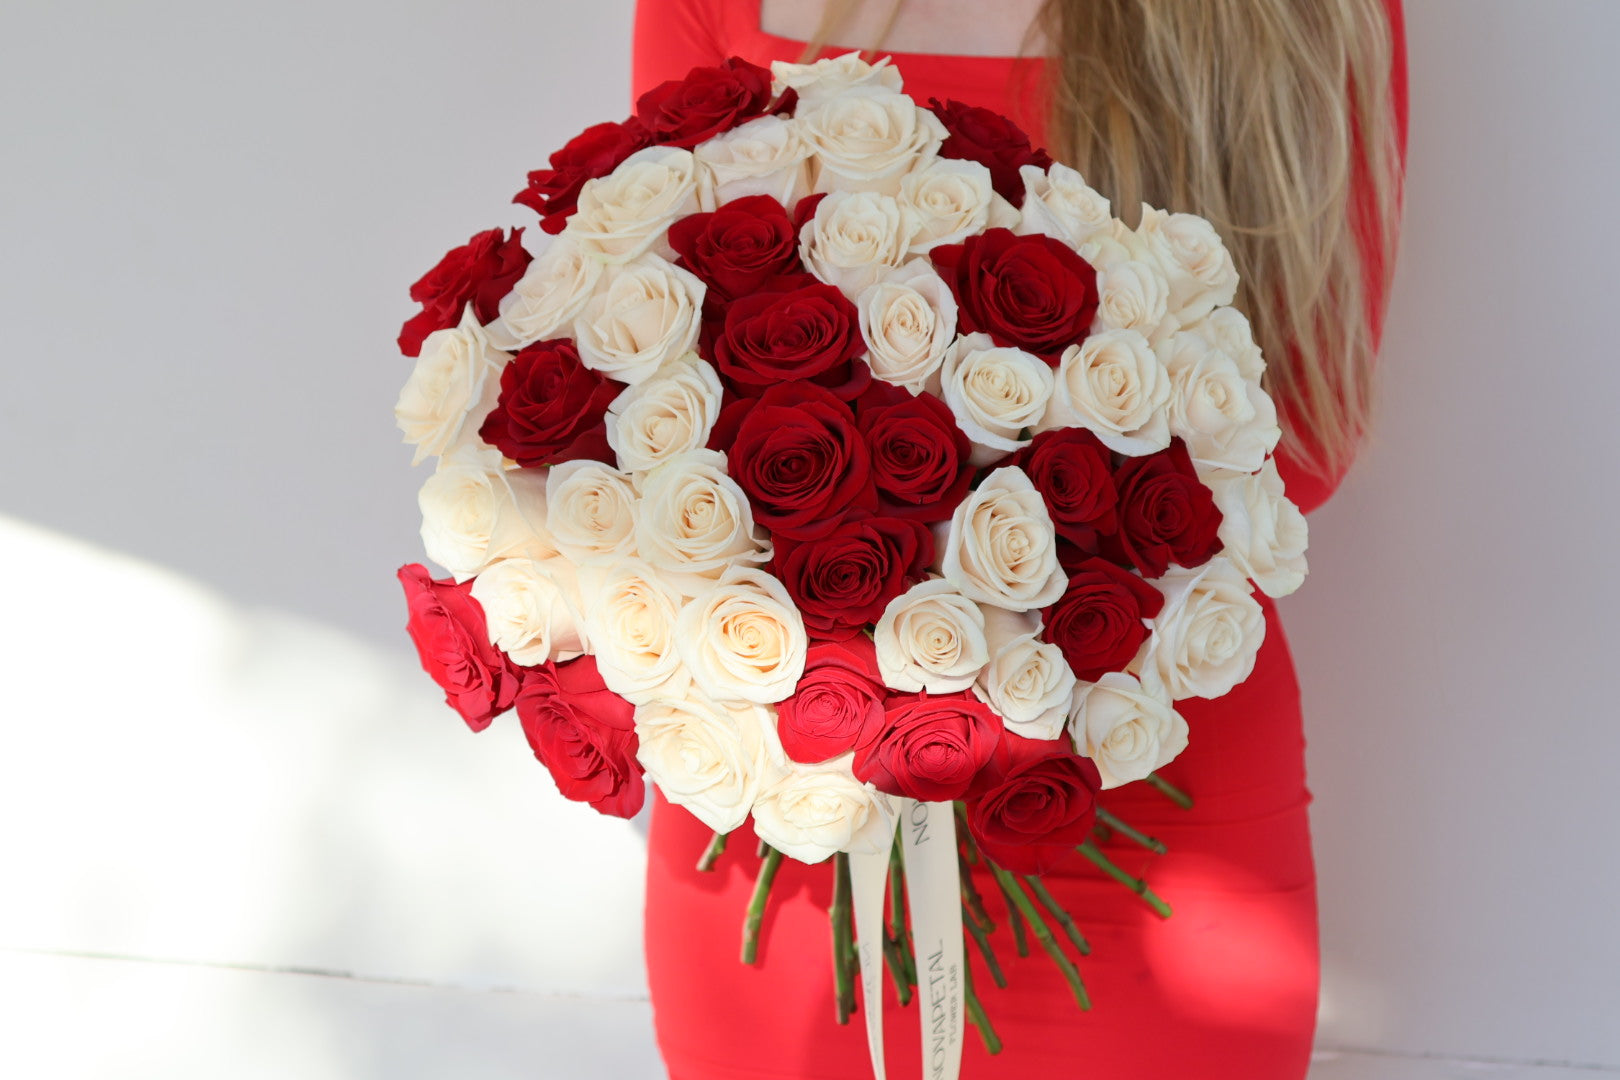 Bouquet of Red & White Roses